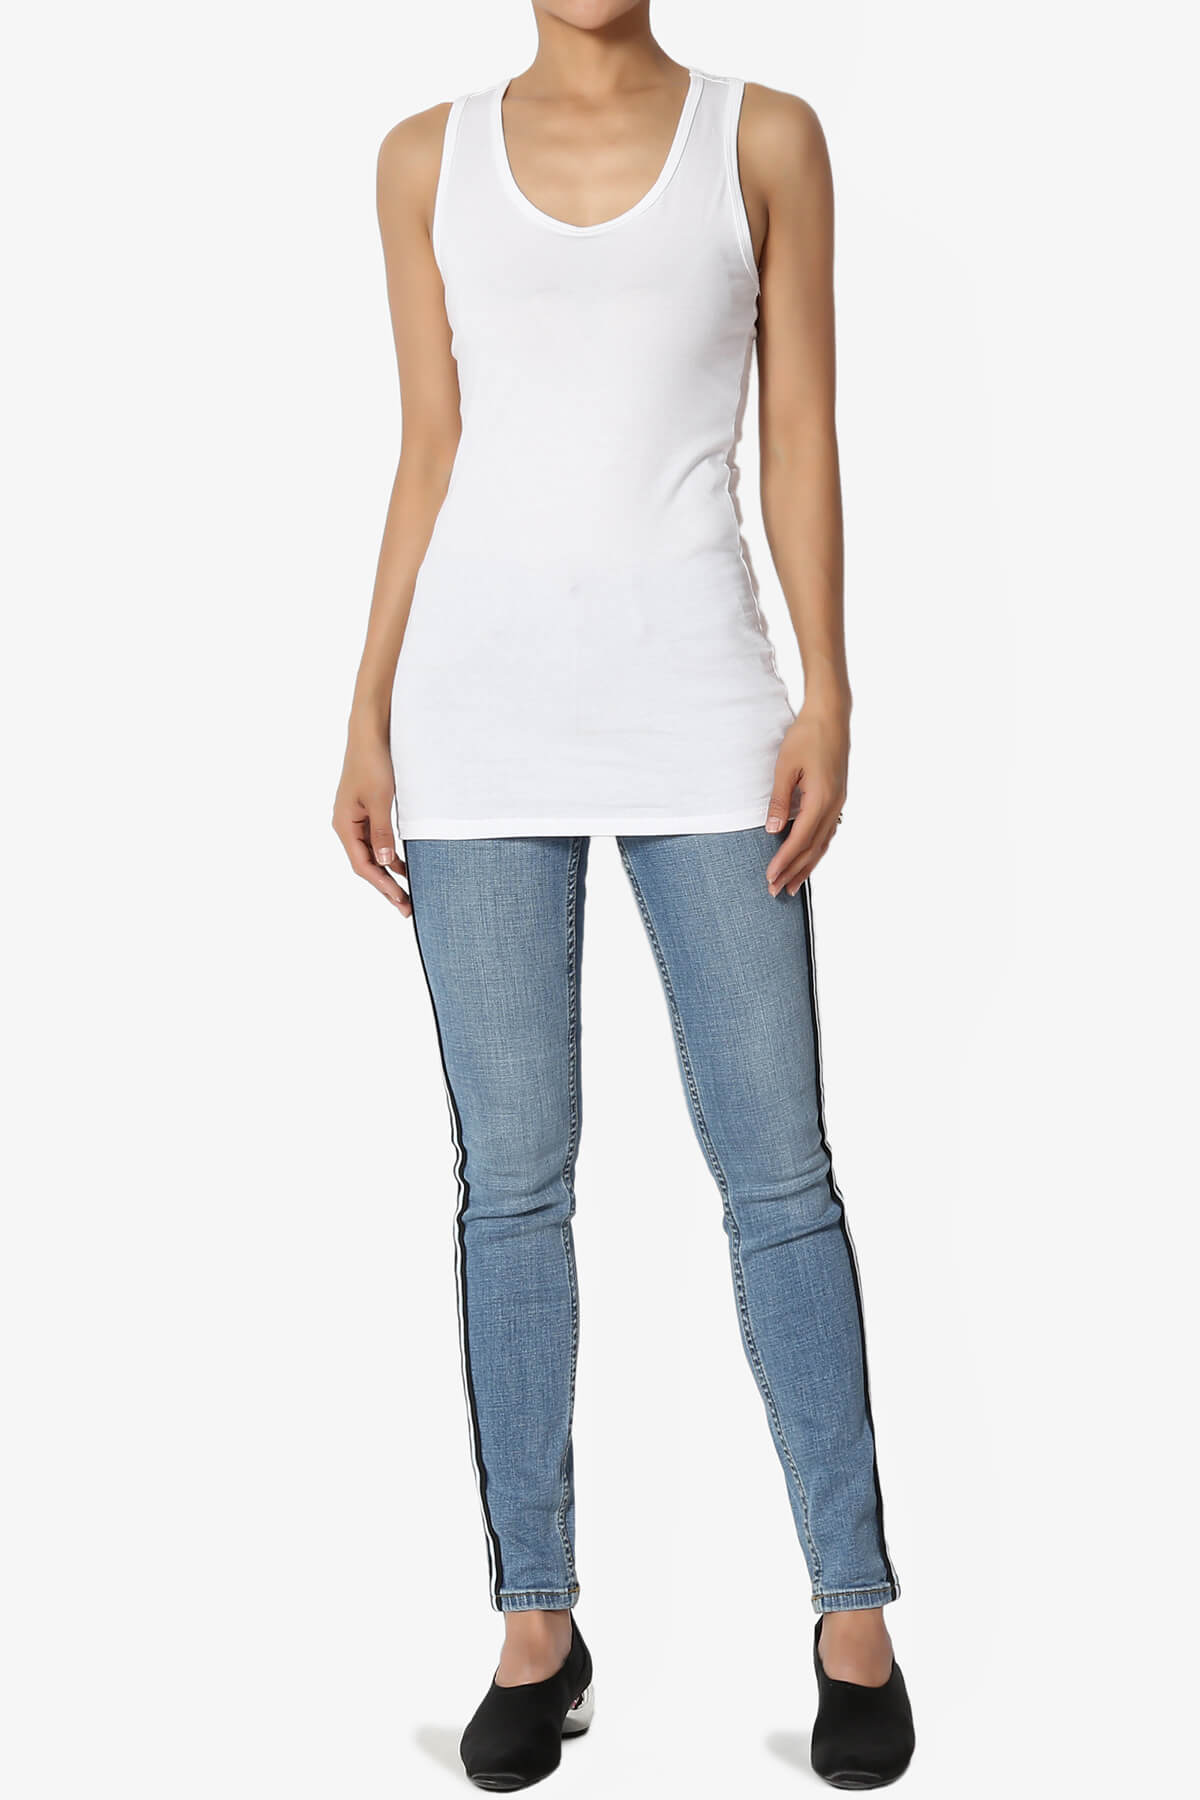 Load image into Gallery viewer, Marnie Racerback Tank Top WHITE_6
